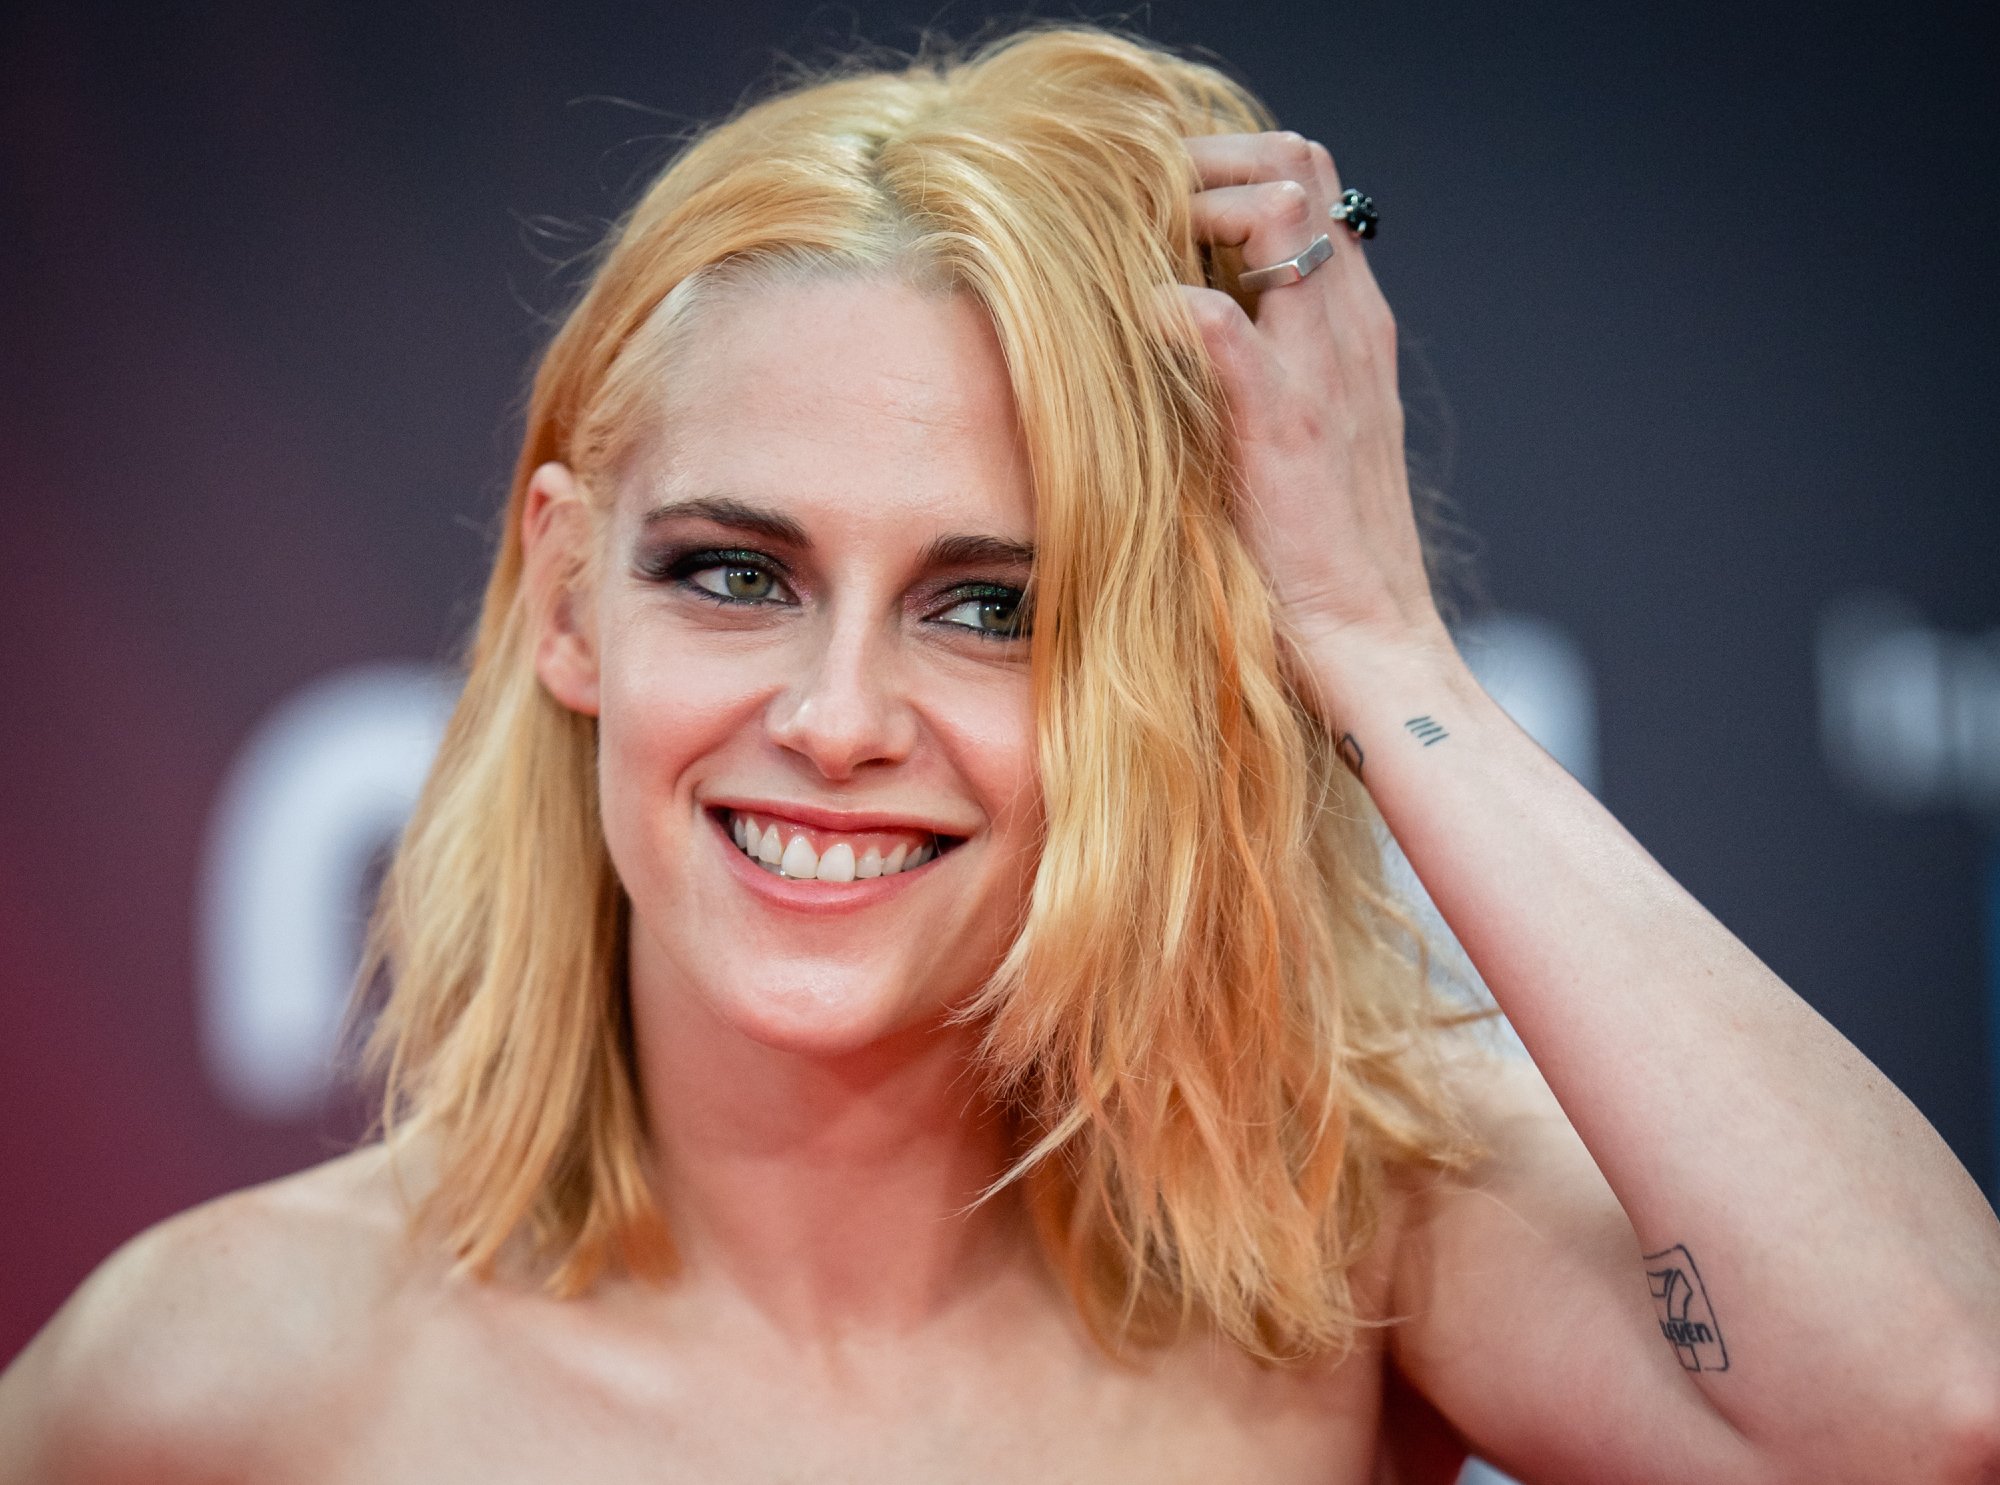 Kristen Stewart at the 'Spencer' UK premiere smiling with her hand in her hair